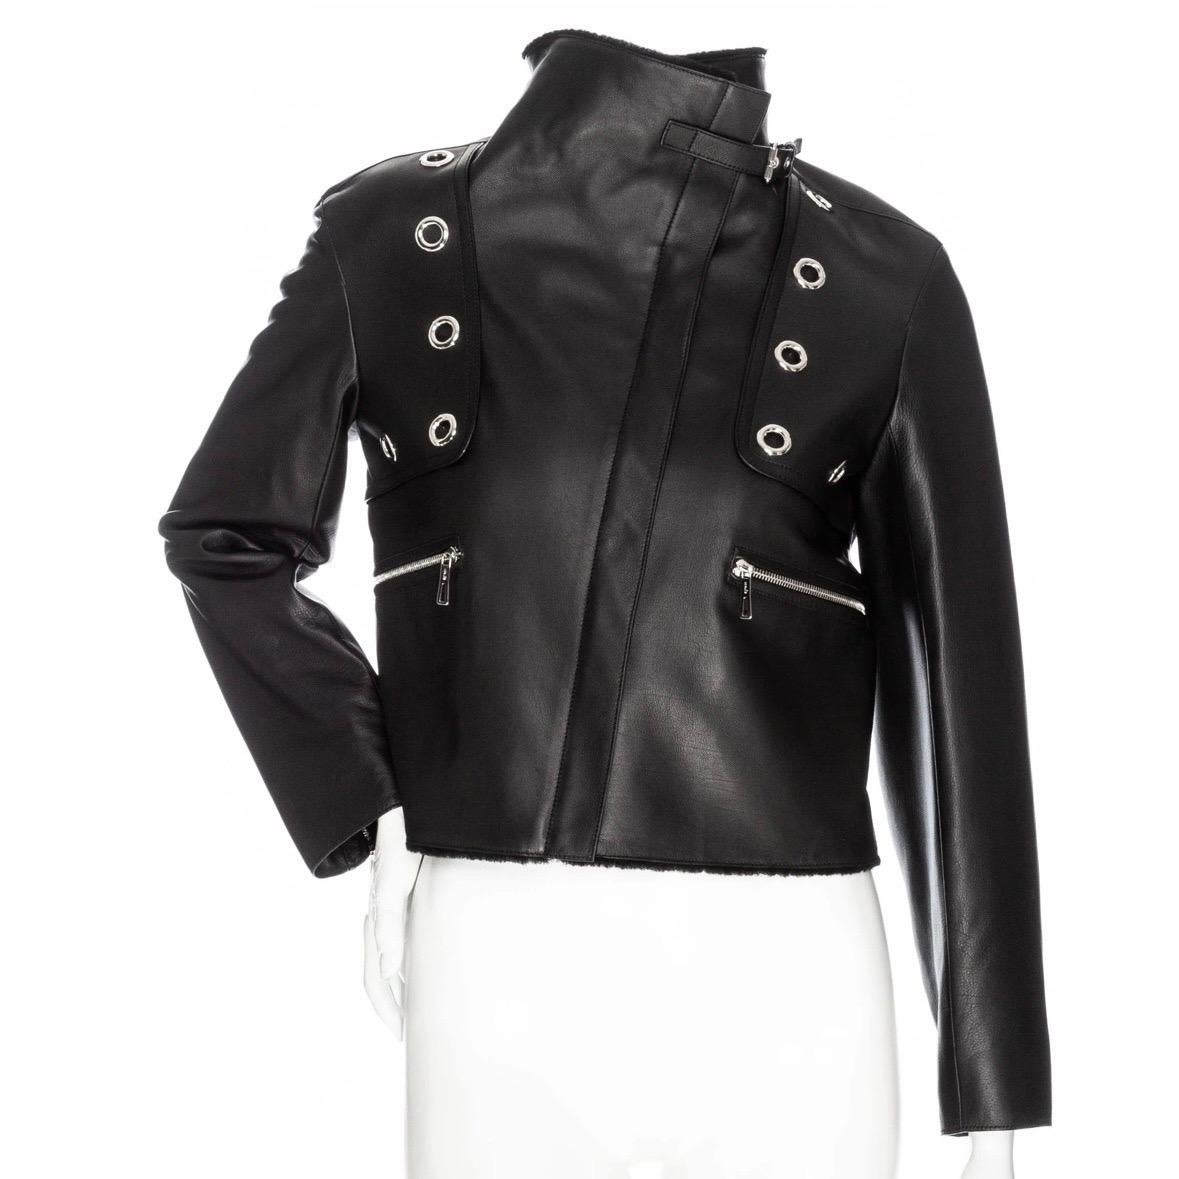 Hermès Black Leather Shearling-Lined Cropped Biker Jacket  

Black
Silver-tone hardware
Logo embossed zipper pulls
Grommet accents
Shearling collar and trim
Optional belted collar strap
Classic biker zippers on cuffs
Front zippered pockets
Concealed